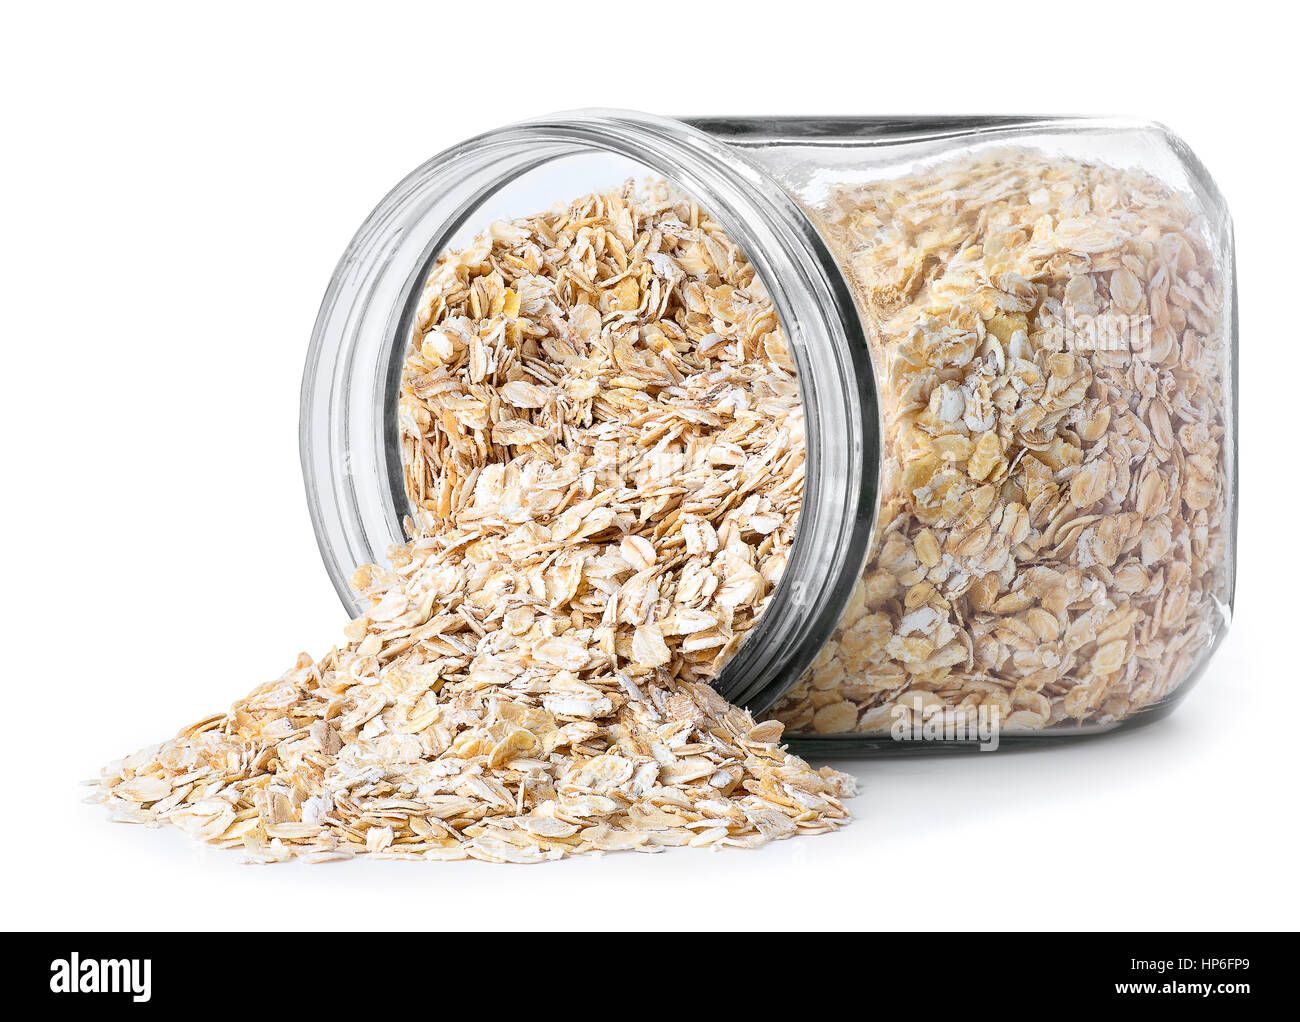 transparent glass jar with rolled oats isolated on white background. Glass jar with oatmeal flakes lying on side isolated on white background. Scatter Stock Photo